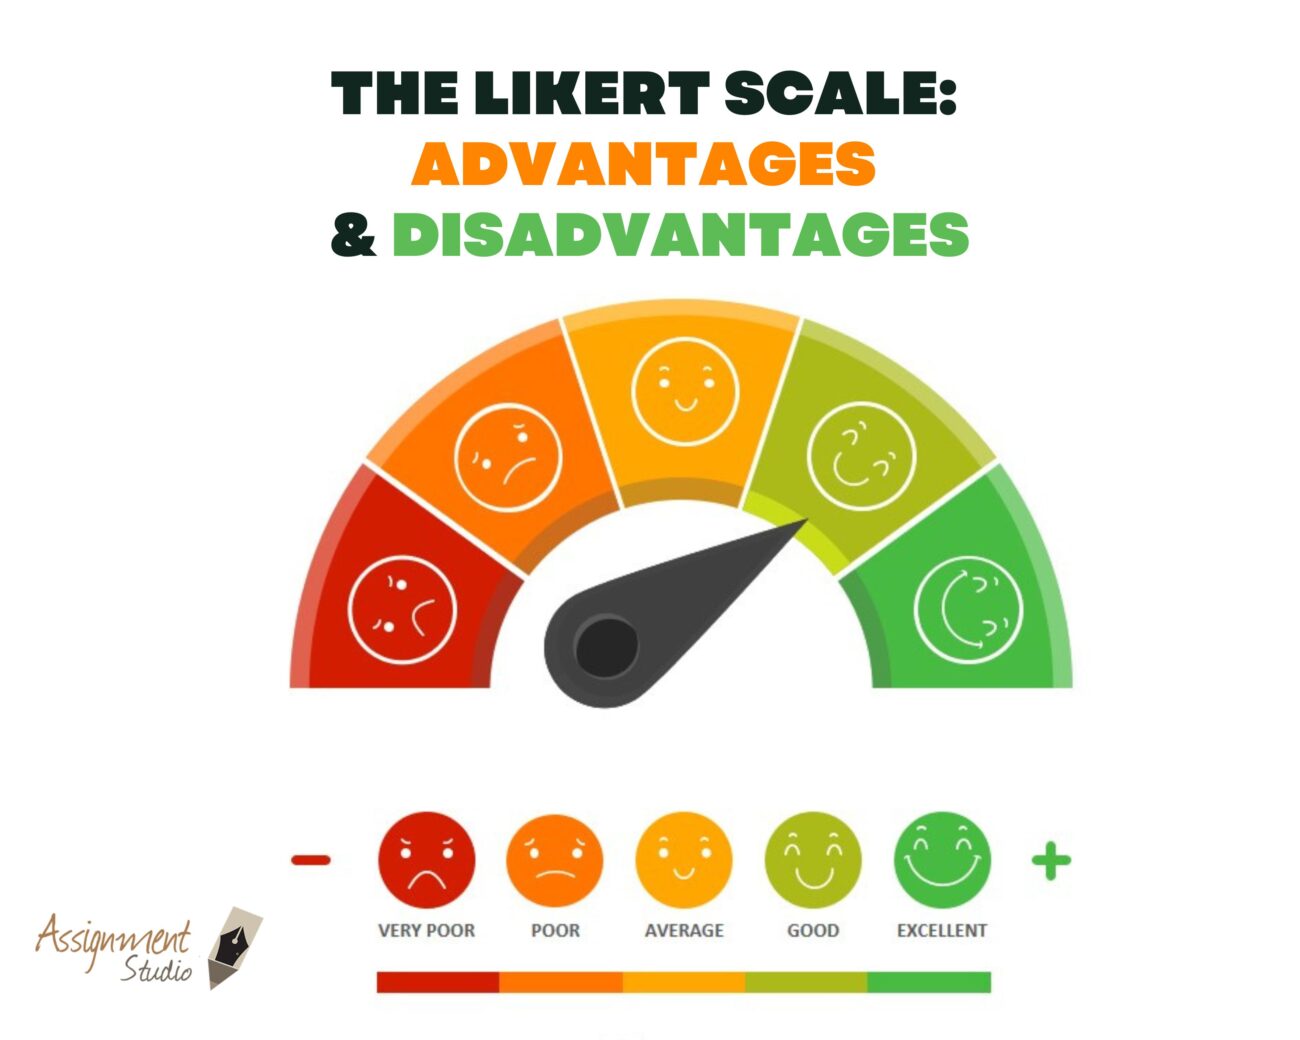 The Likert Scale Advantages and Disadvantages